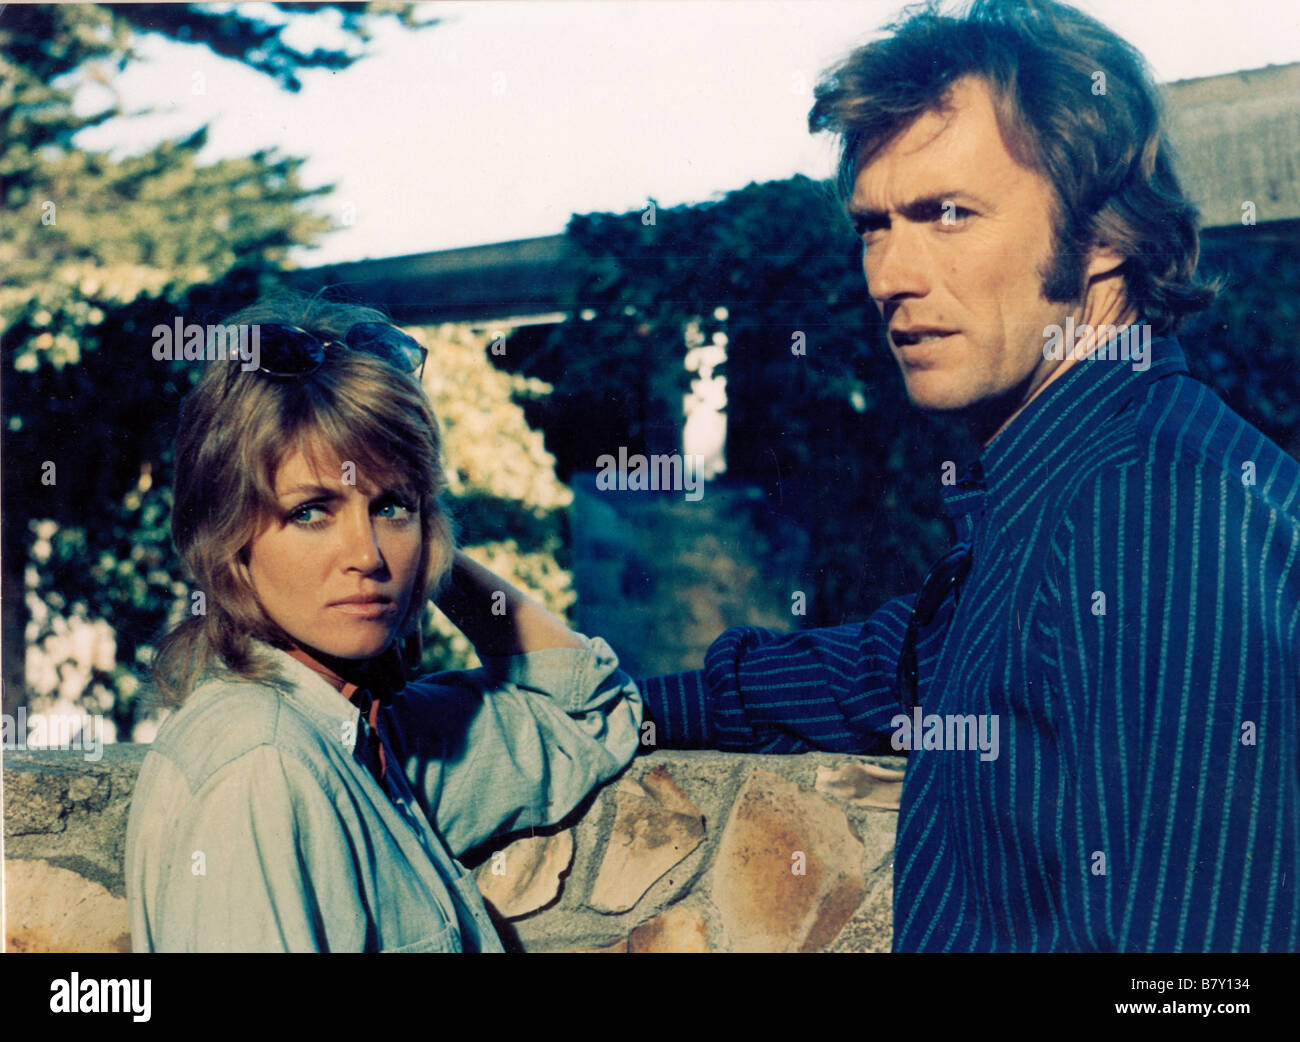 Play Misty for Me  Year: 1971 USA Clint Eastwood, Donna Mills Director: Clint Eastwood Stock Photo